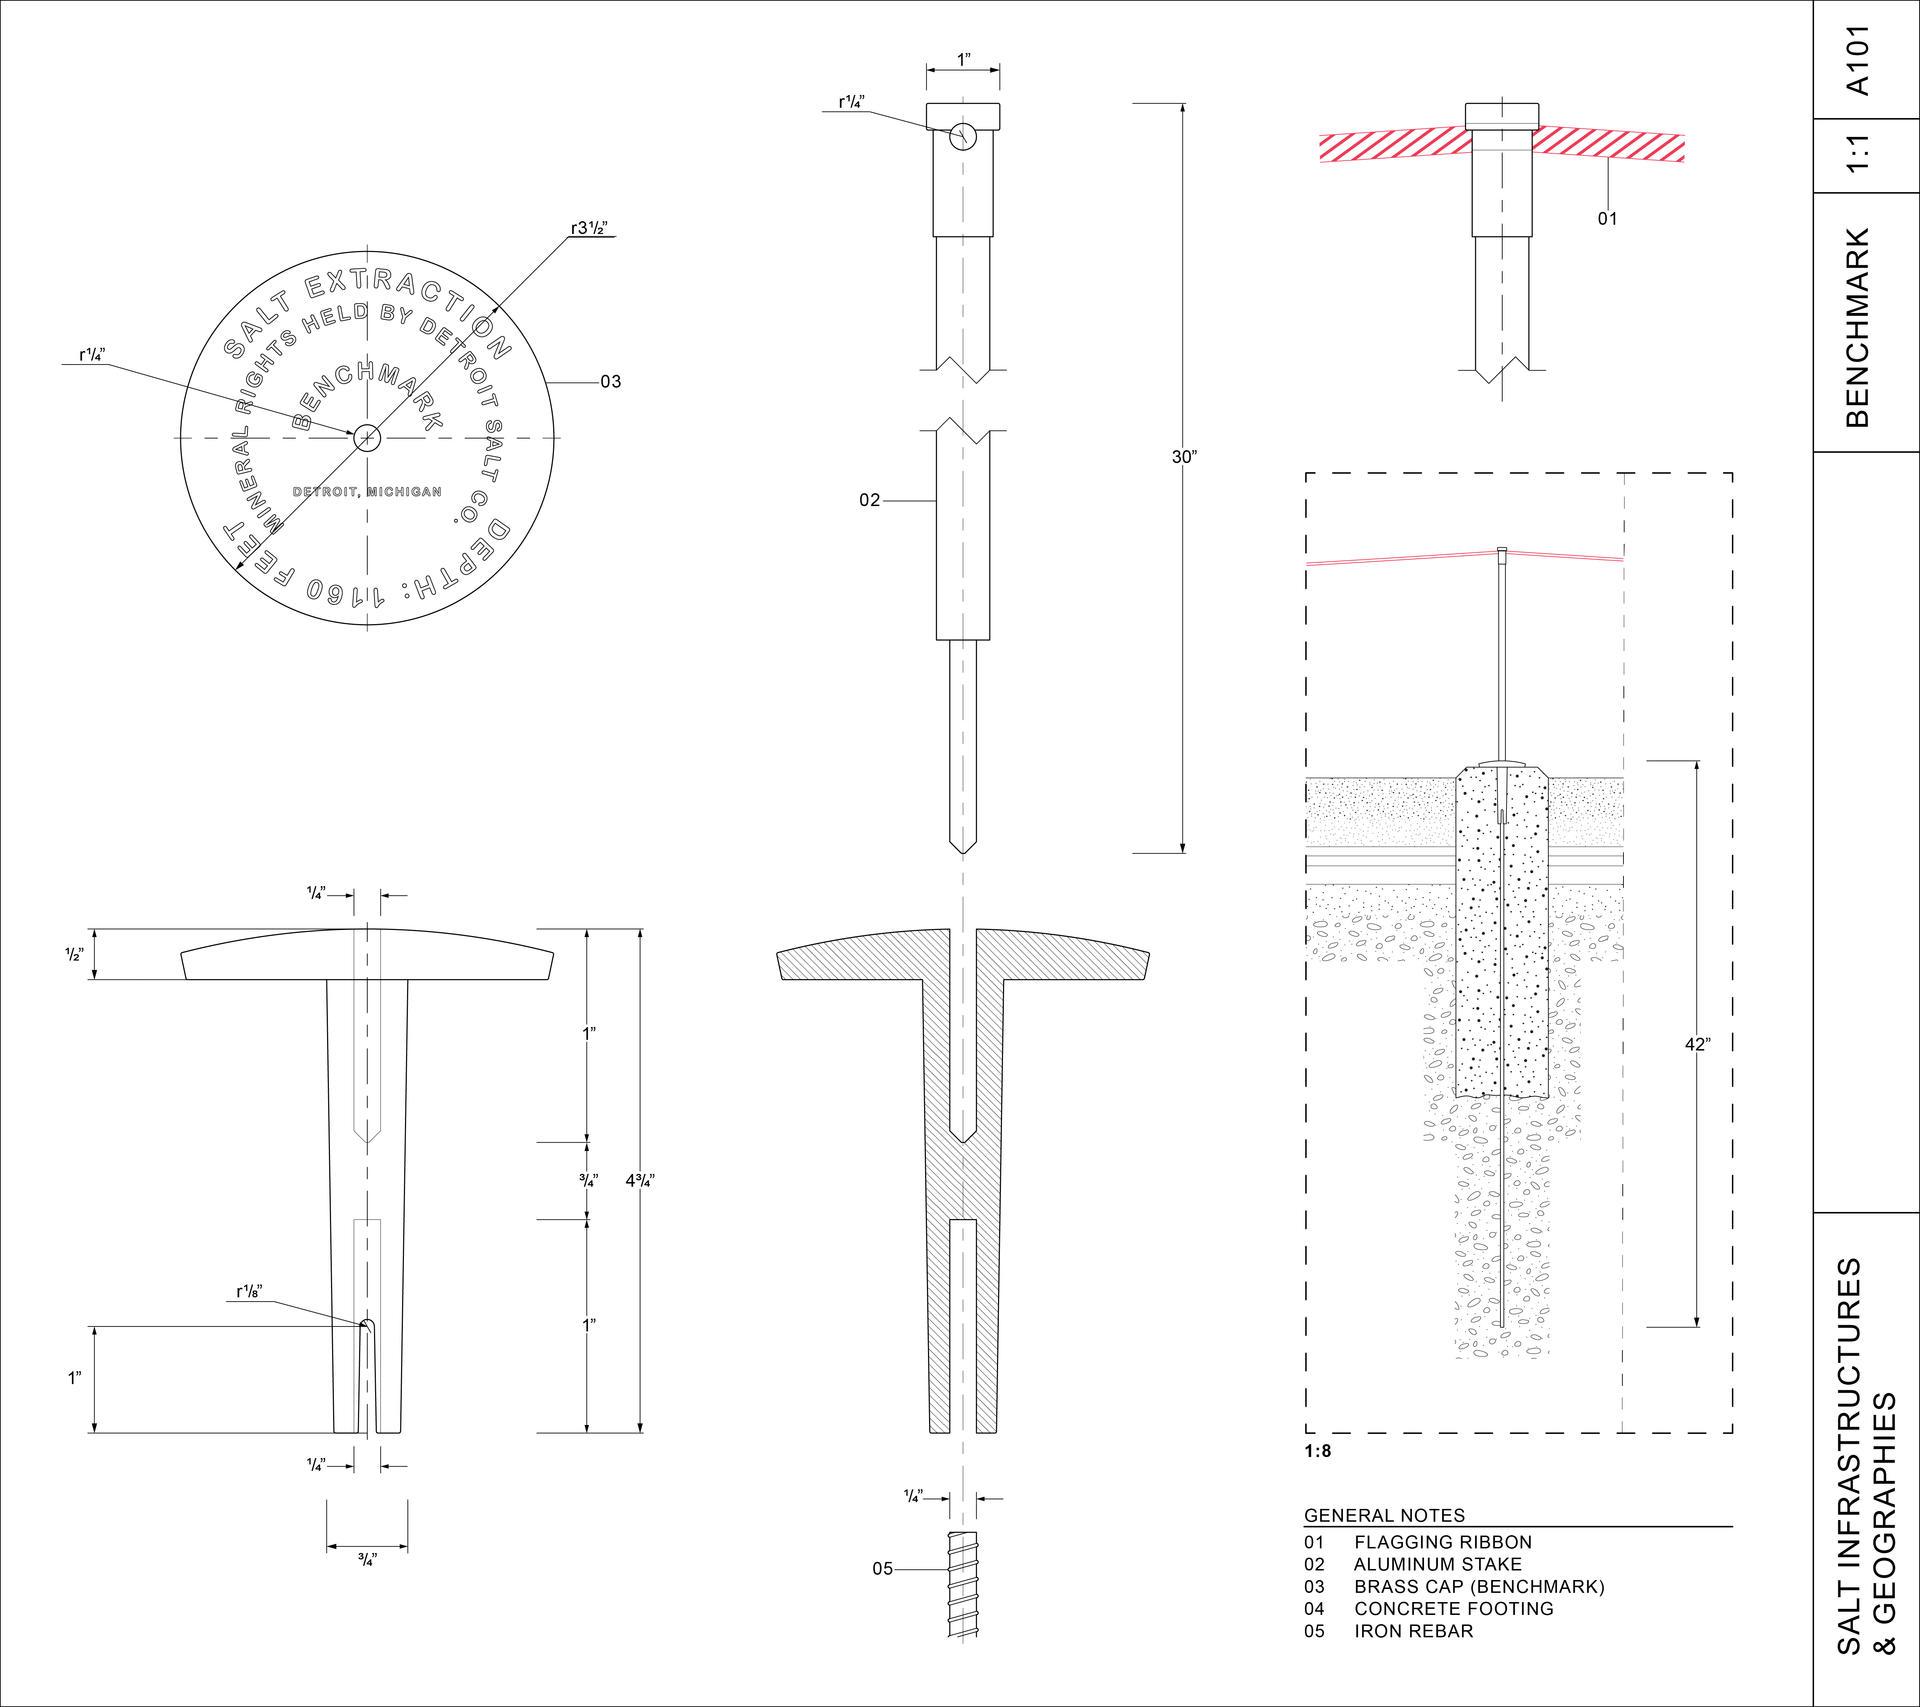 A cad drawing depicts a steel benchmark pin, meant to demarcate mineral rights and scales of salt extraction beneath the urban fabric of Detroit